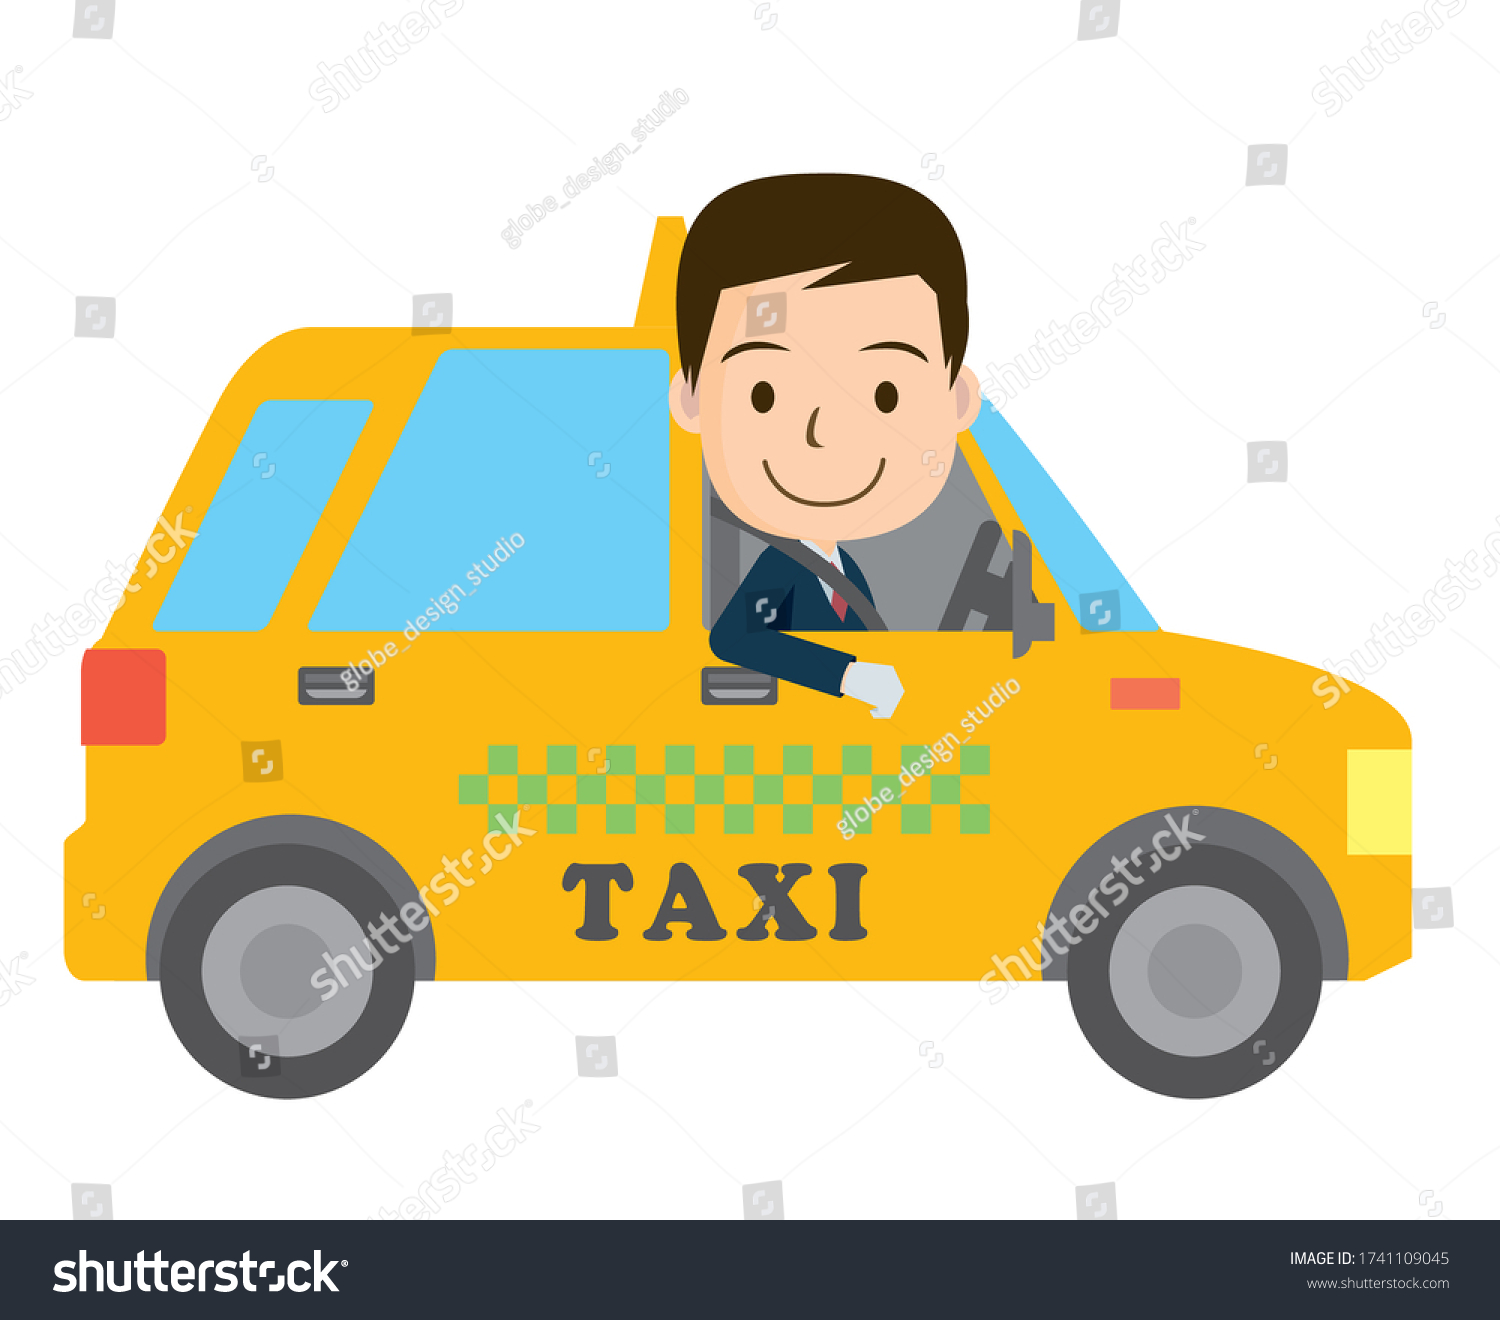 Illustration Working Car Illustration Taxi Cute Stock Vector (Royalty ...